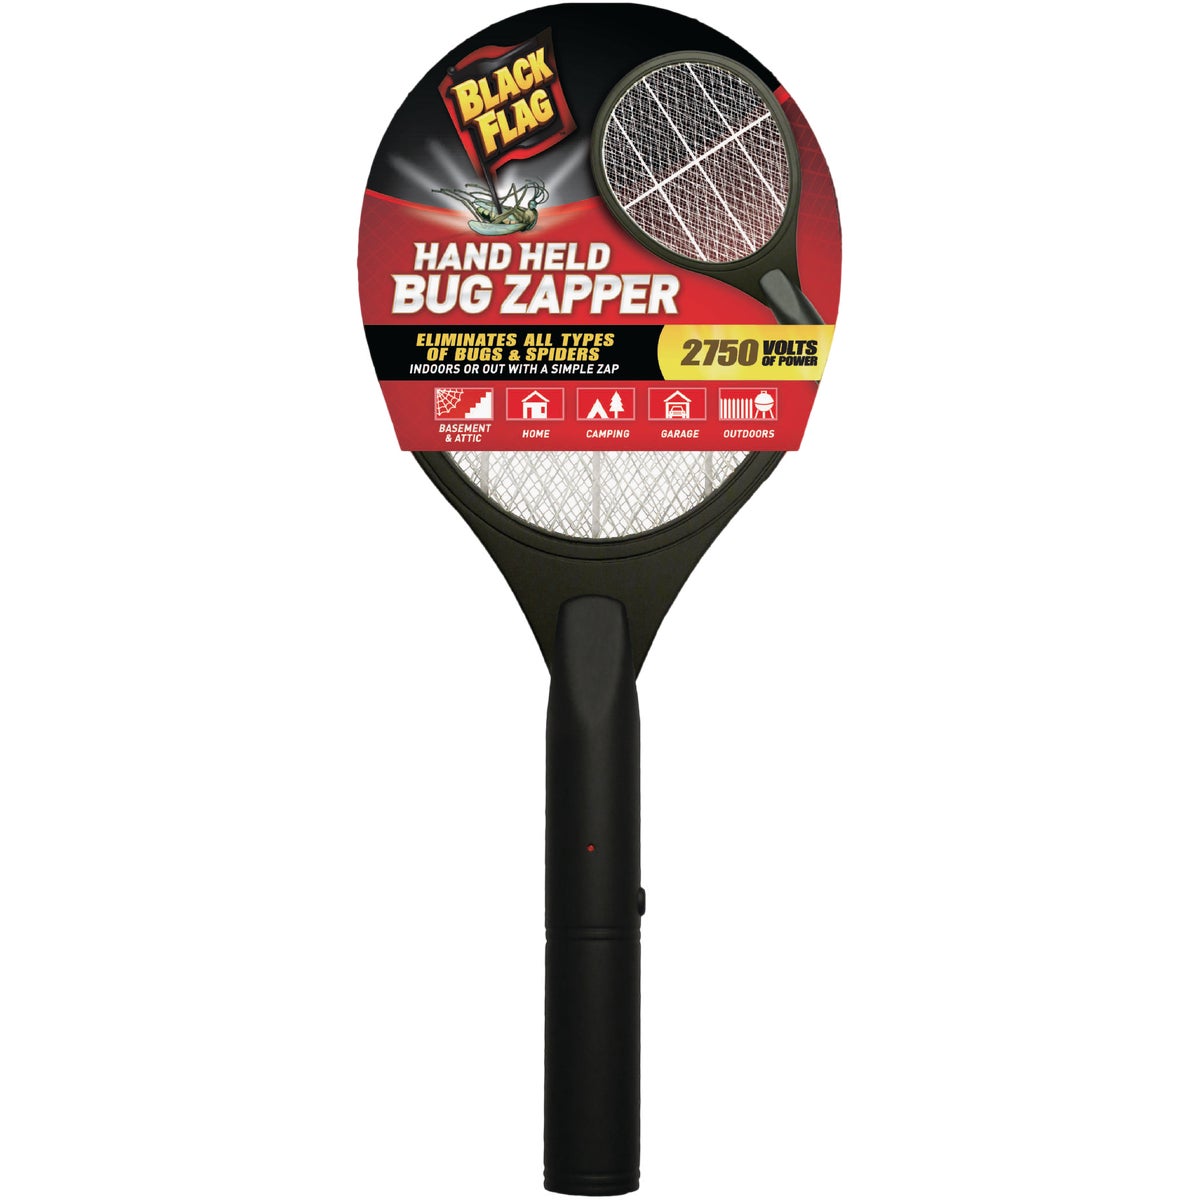 Item 704783, Racket-style handheld bug zapper puts the fun in bug control.